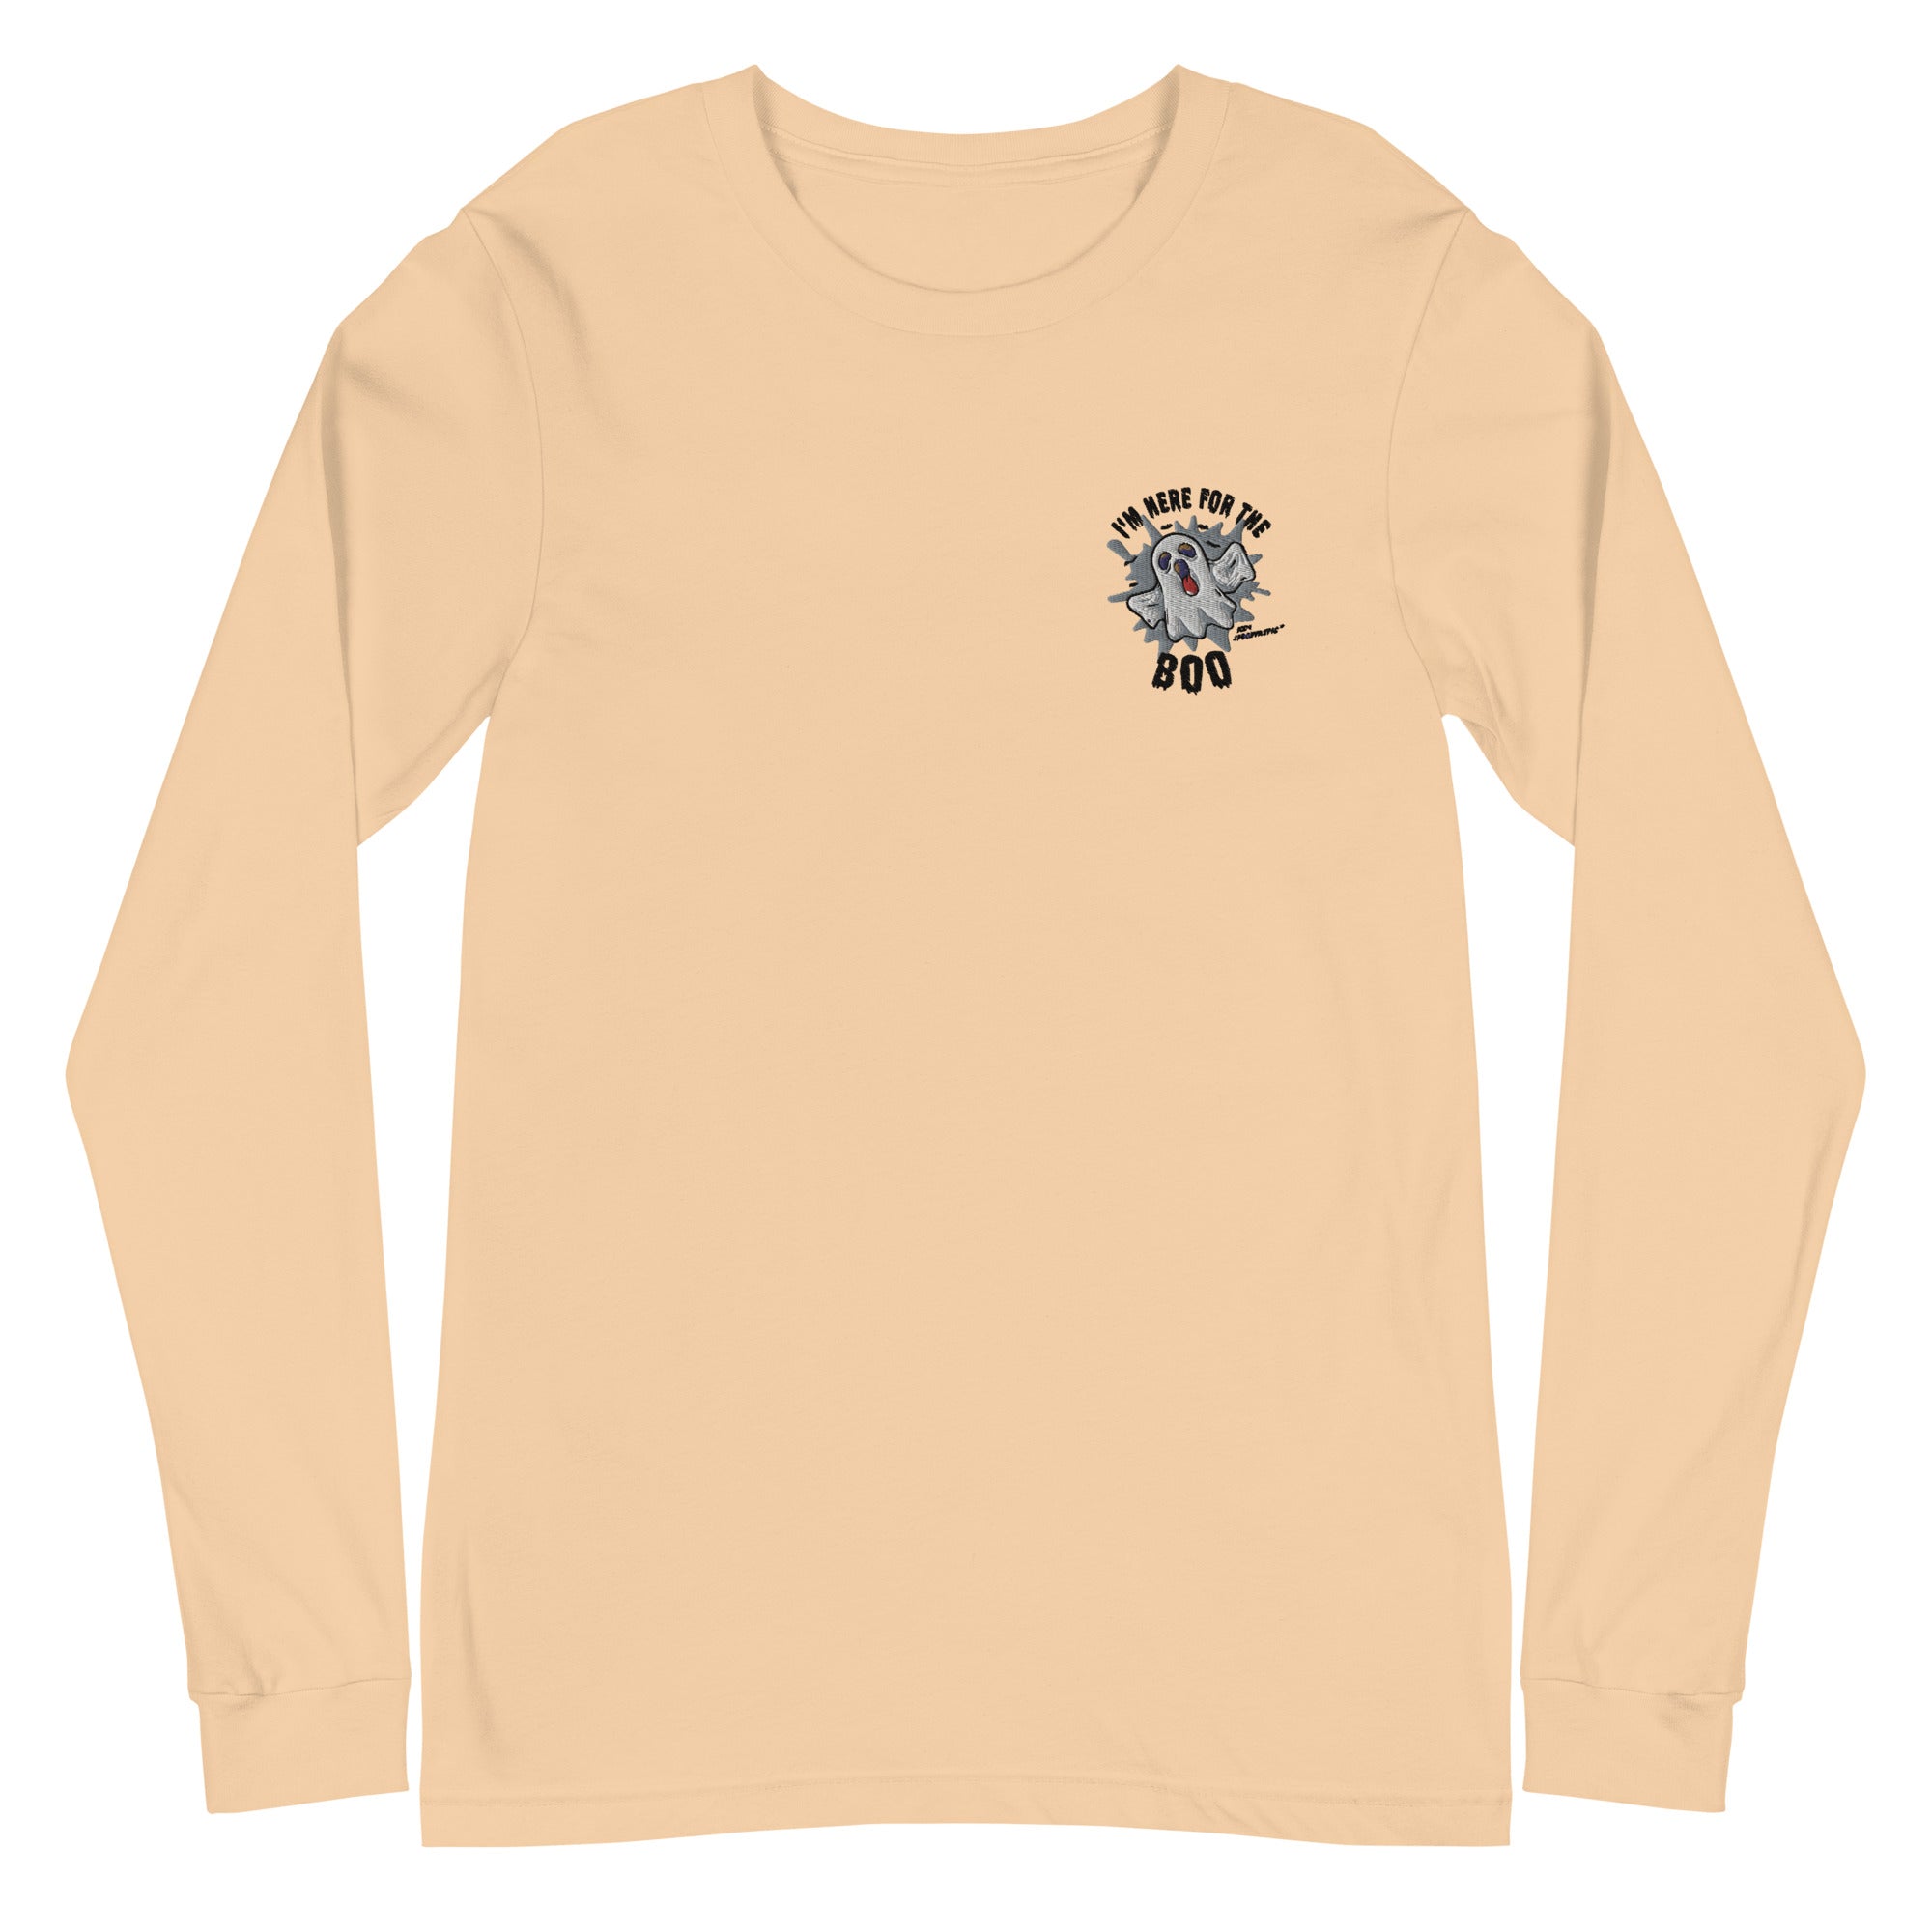 I'm Here For the Boo Unisex Long Sleeve Tee